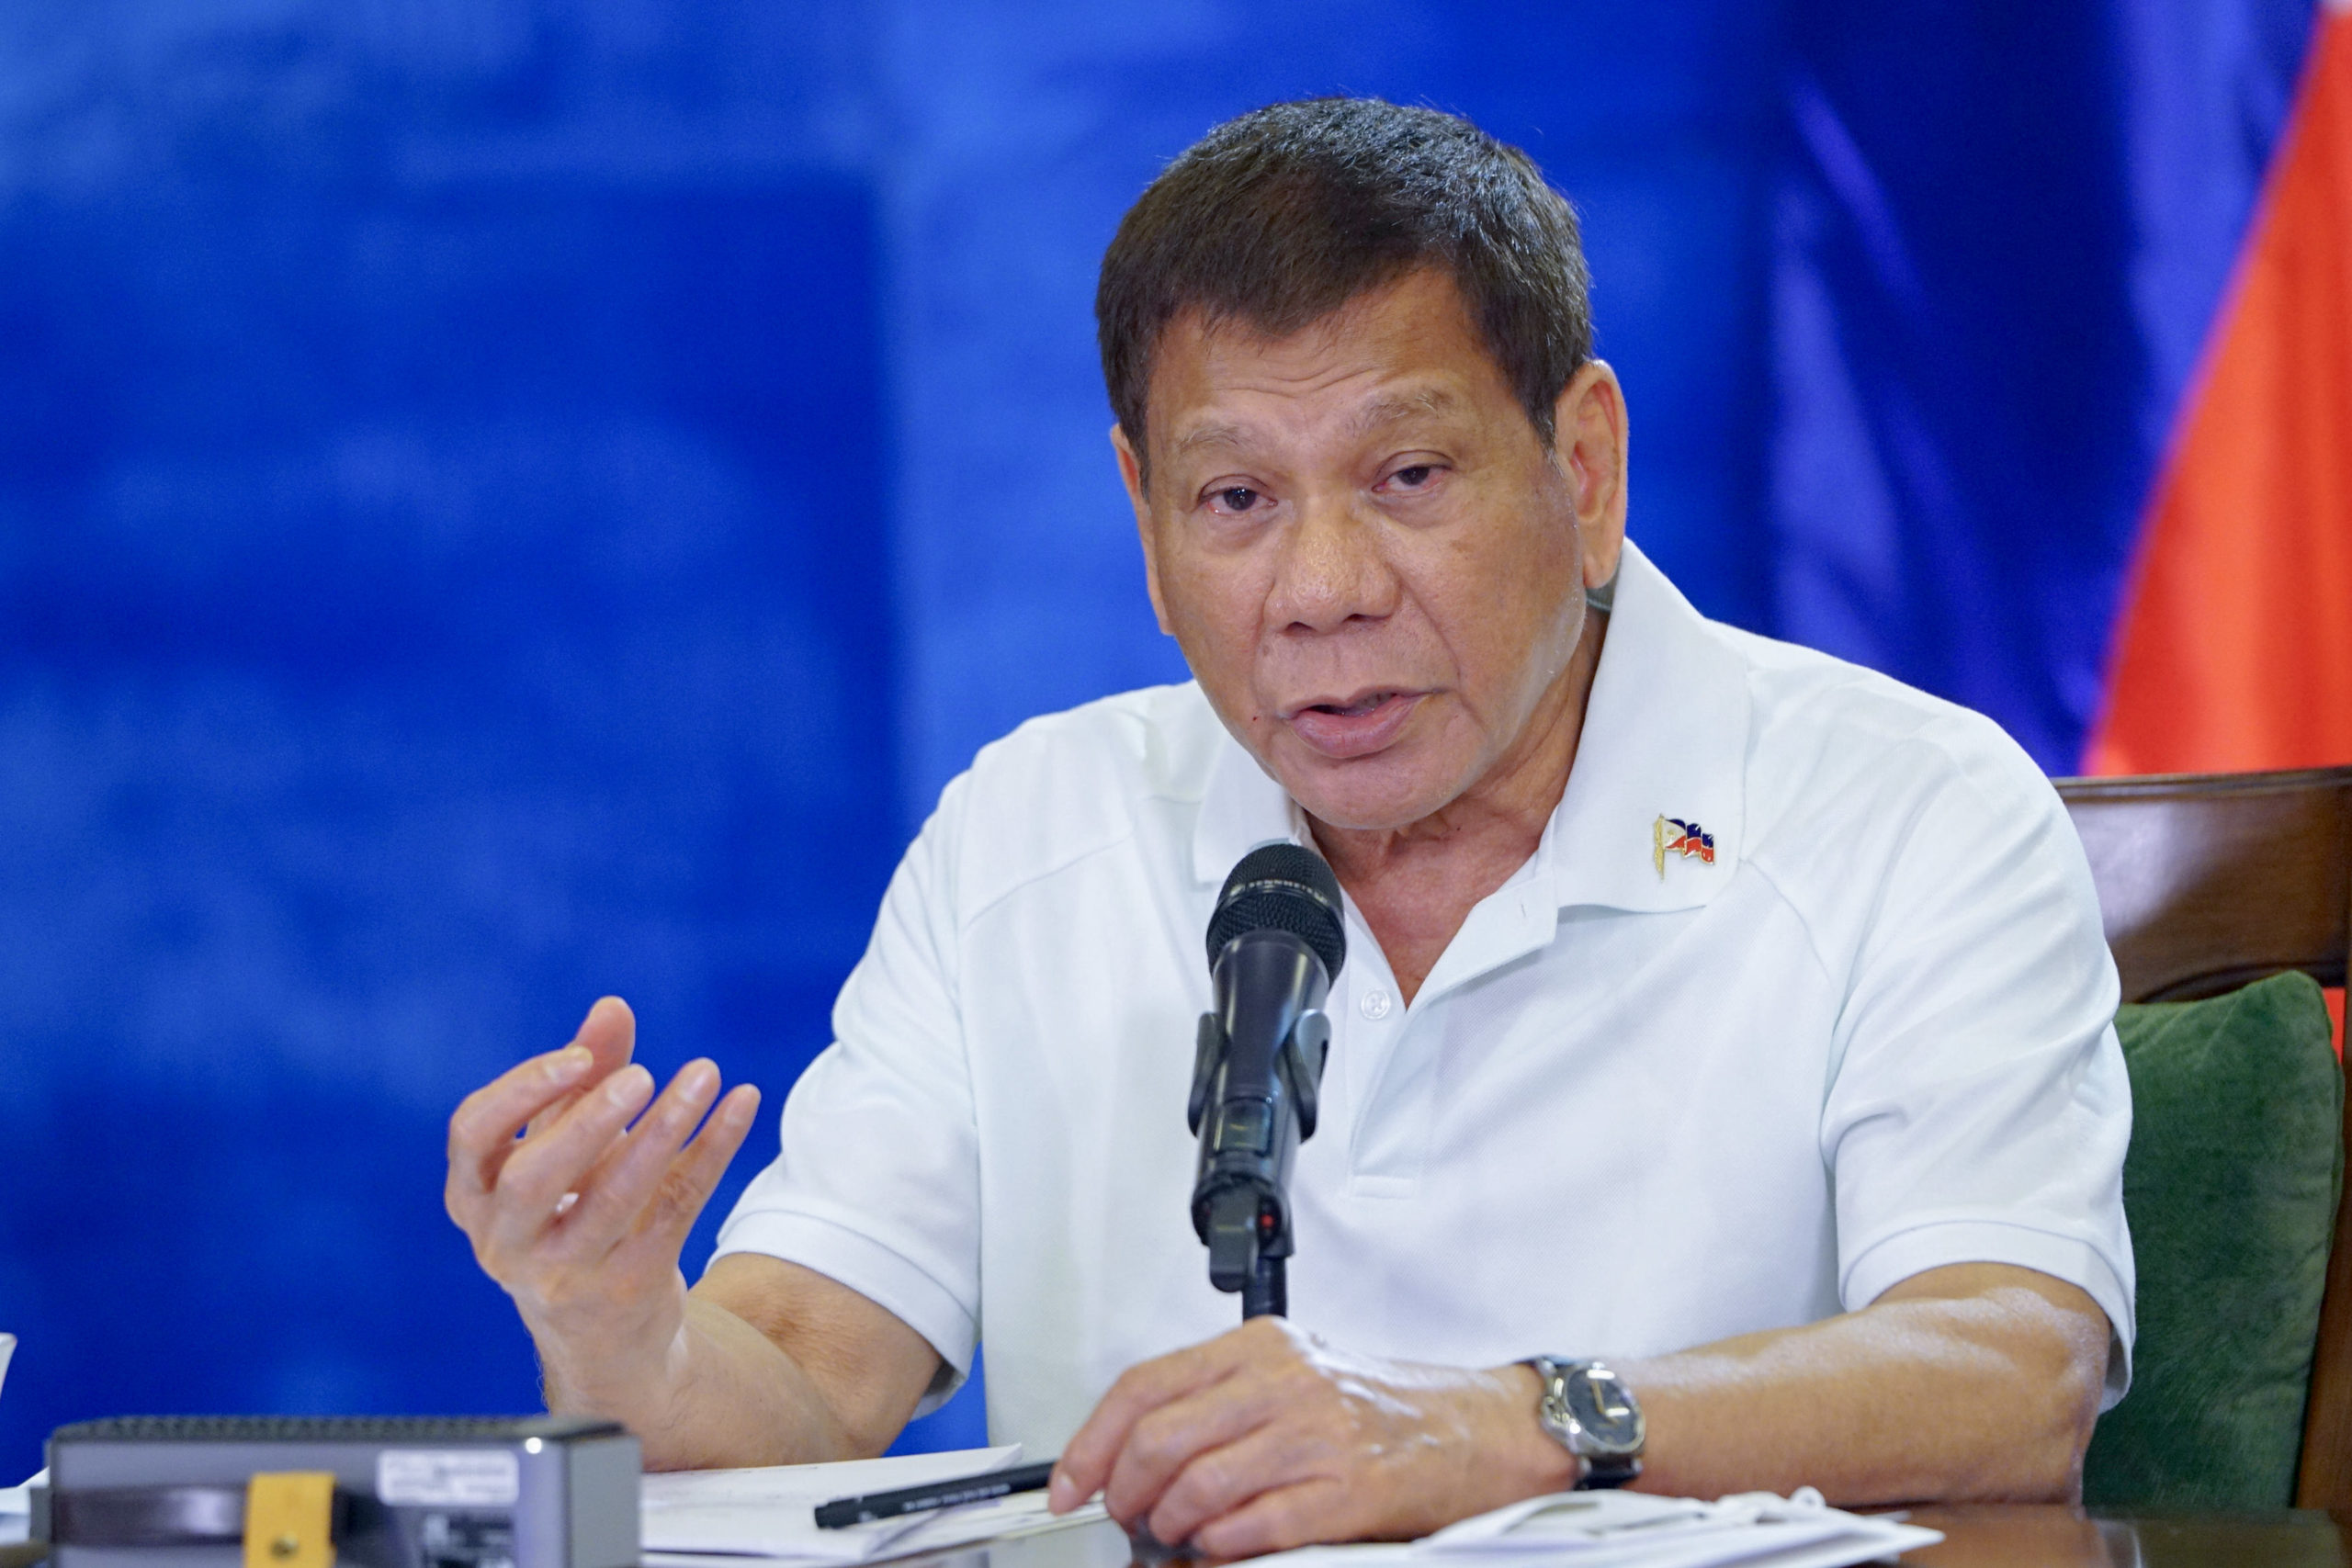 Duterte holds 'nothing' as legacy but wants people 'to just look around'